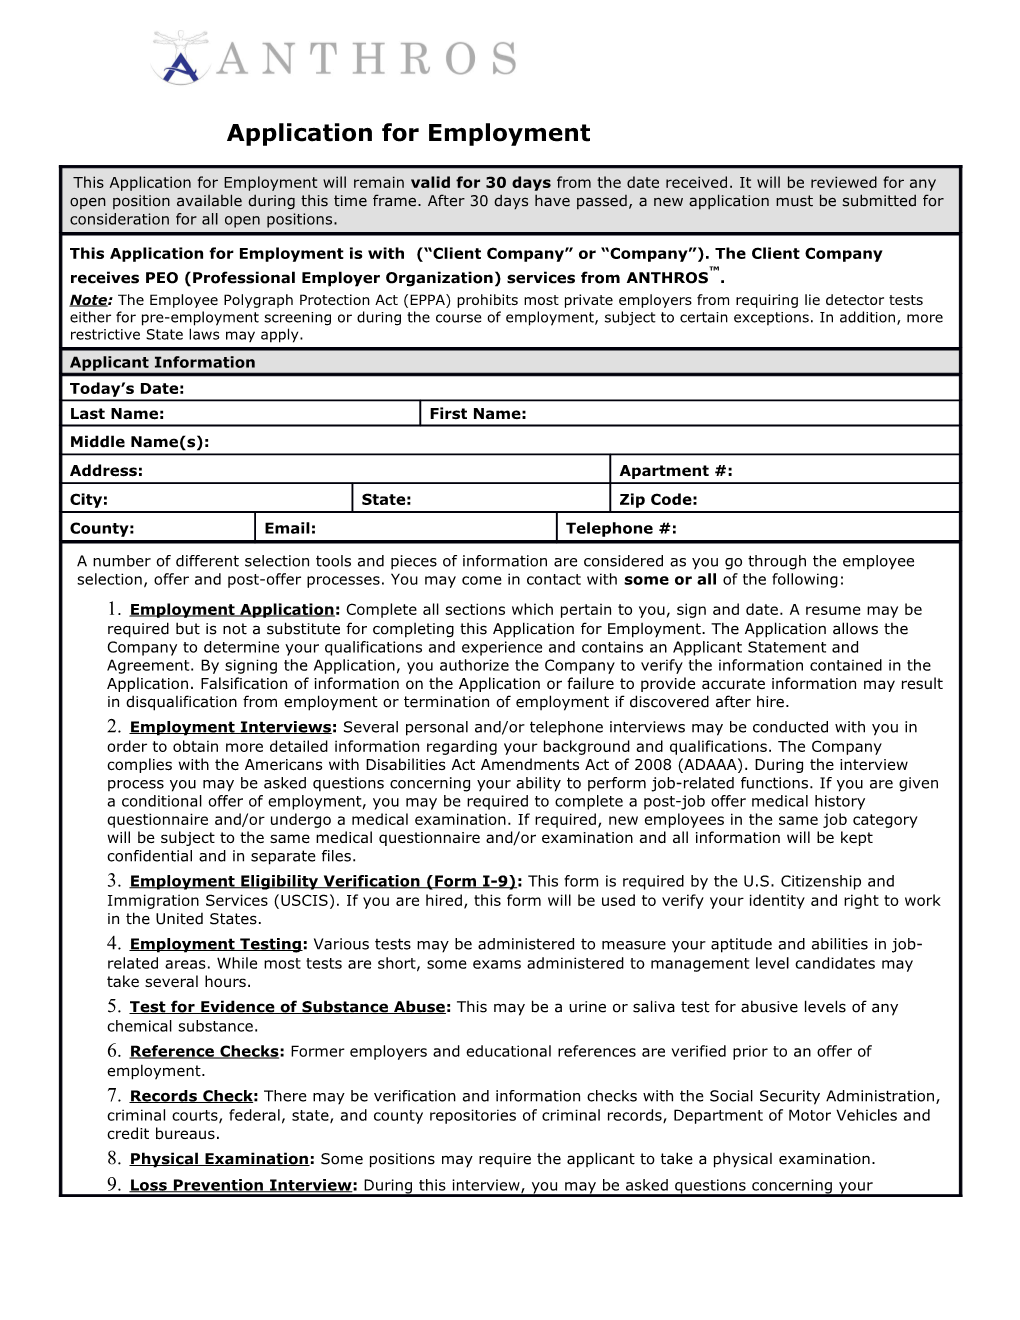 Application for Employment s49